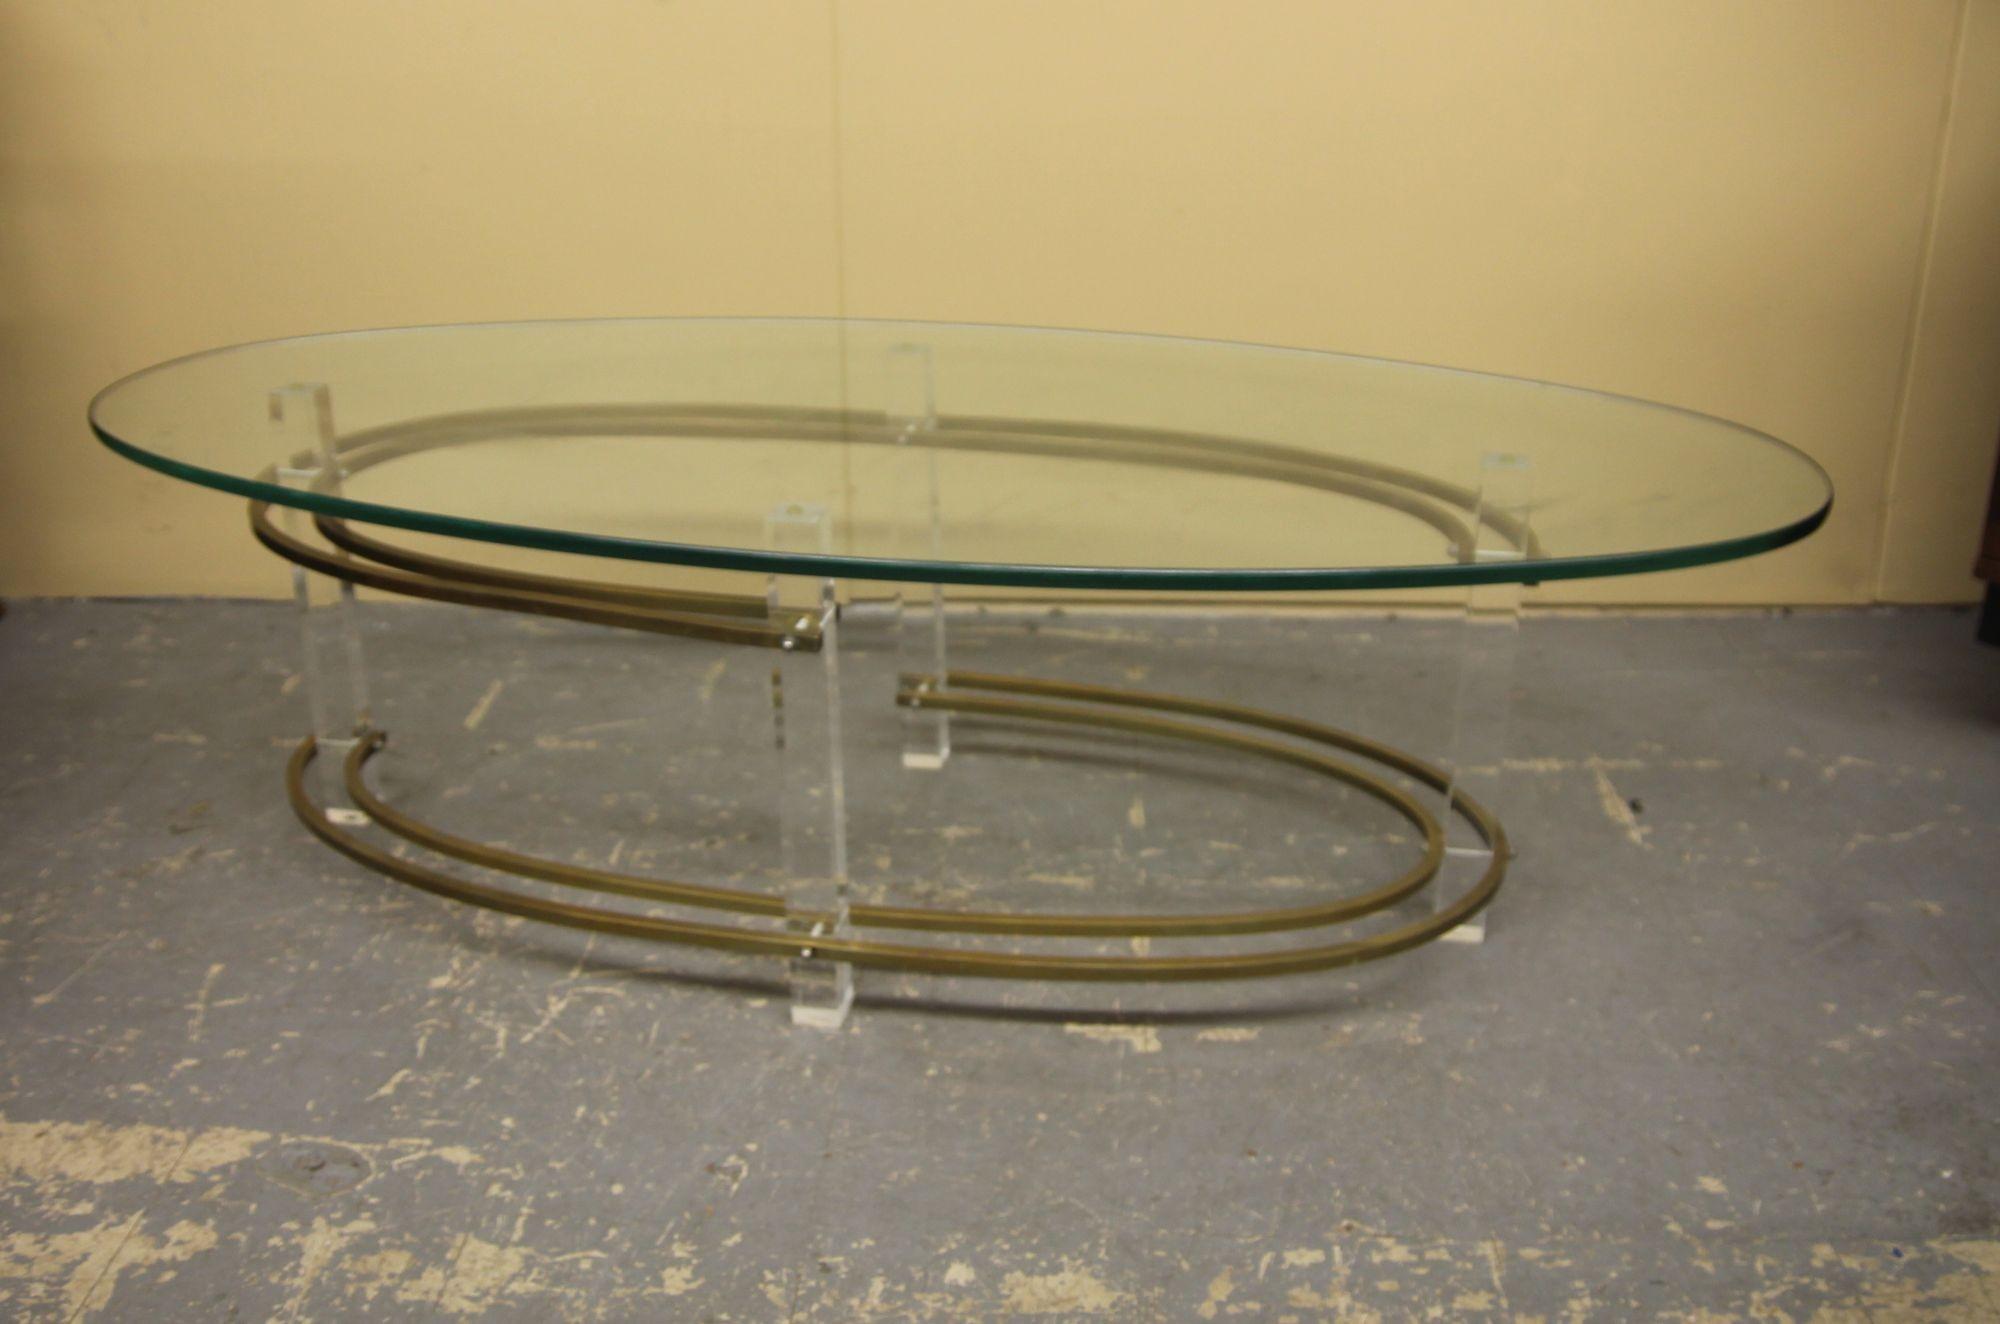 Pleased to offer this lucite, brass and oval glass top coffee table. Table is in great vintage condition. I just listed the matching side table as well.